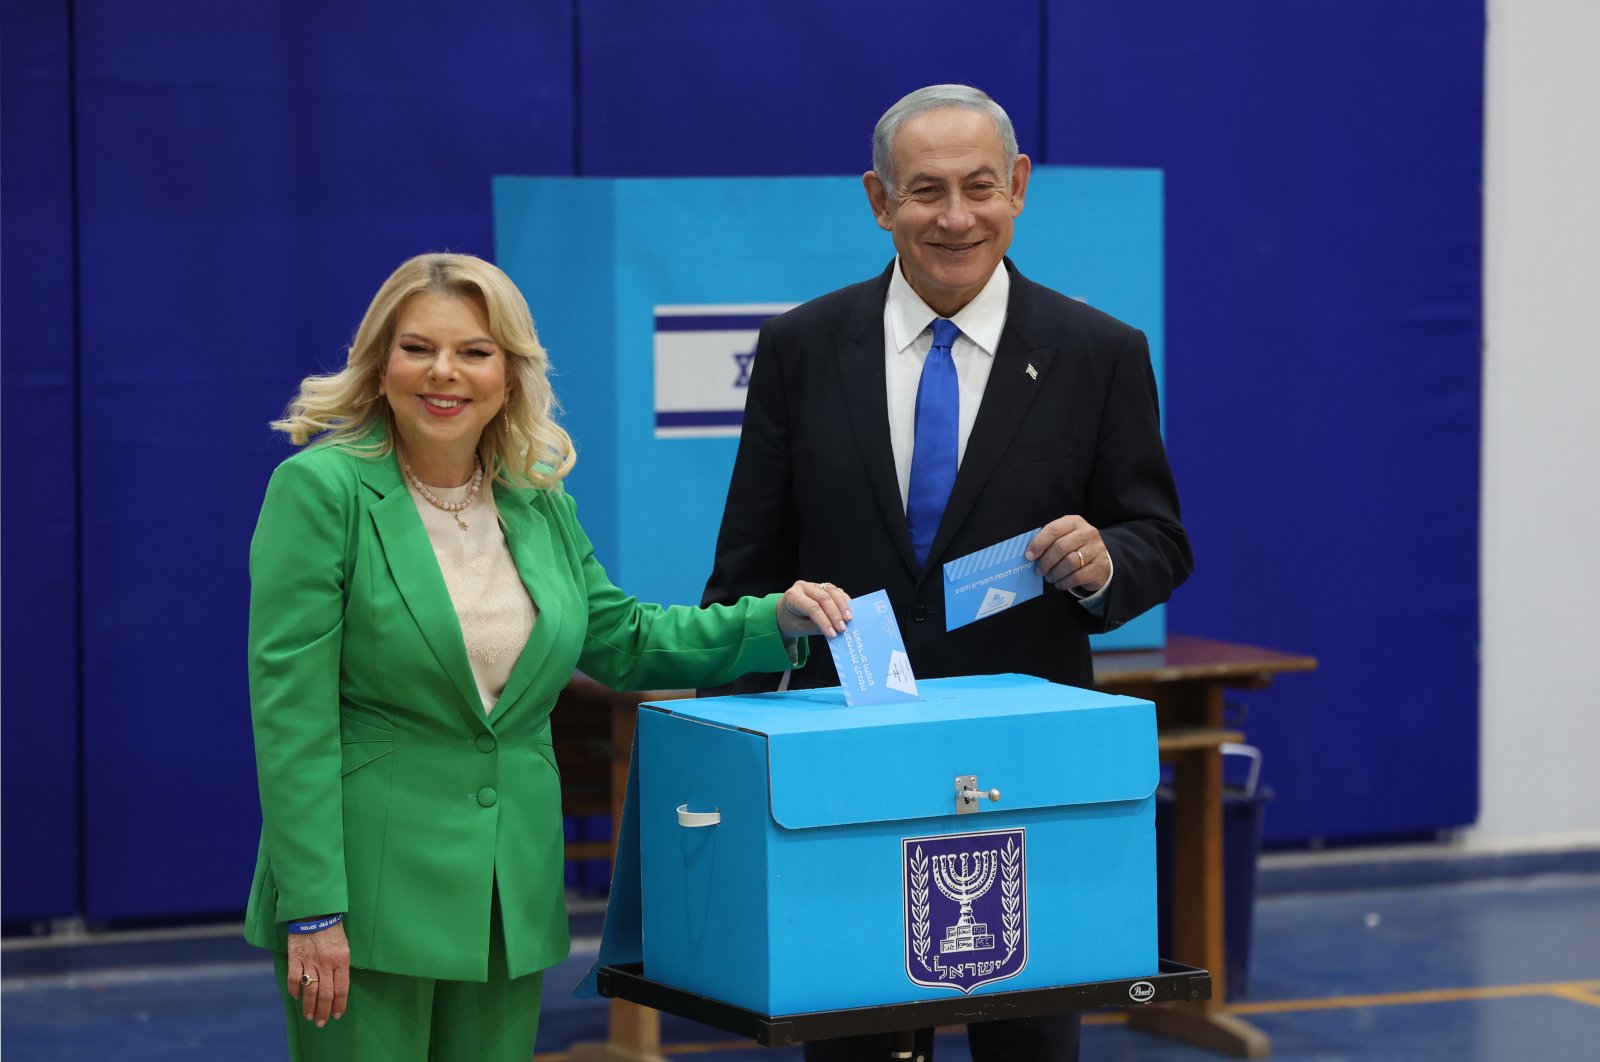 Former Israeli Prime Minister and leader of the Likud party Benjamin Netanyahu (R) and his wife Sara cast their ballots at a polling station, Jerusalem, Israel, Nov. 1, 2022. (EPA Photo)